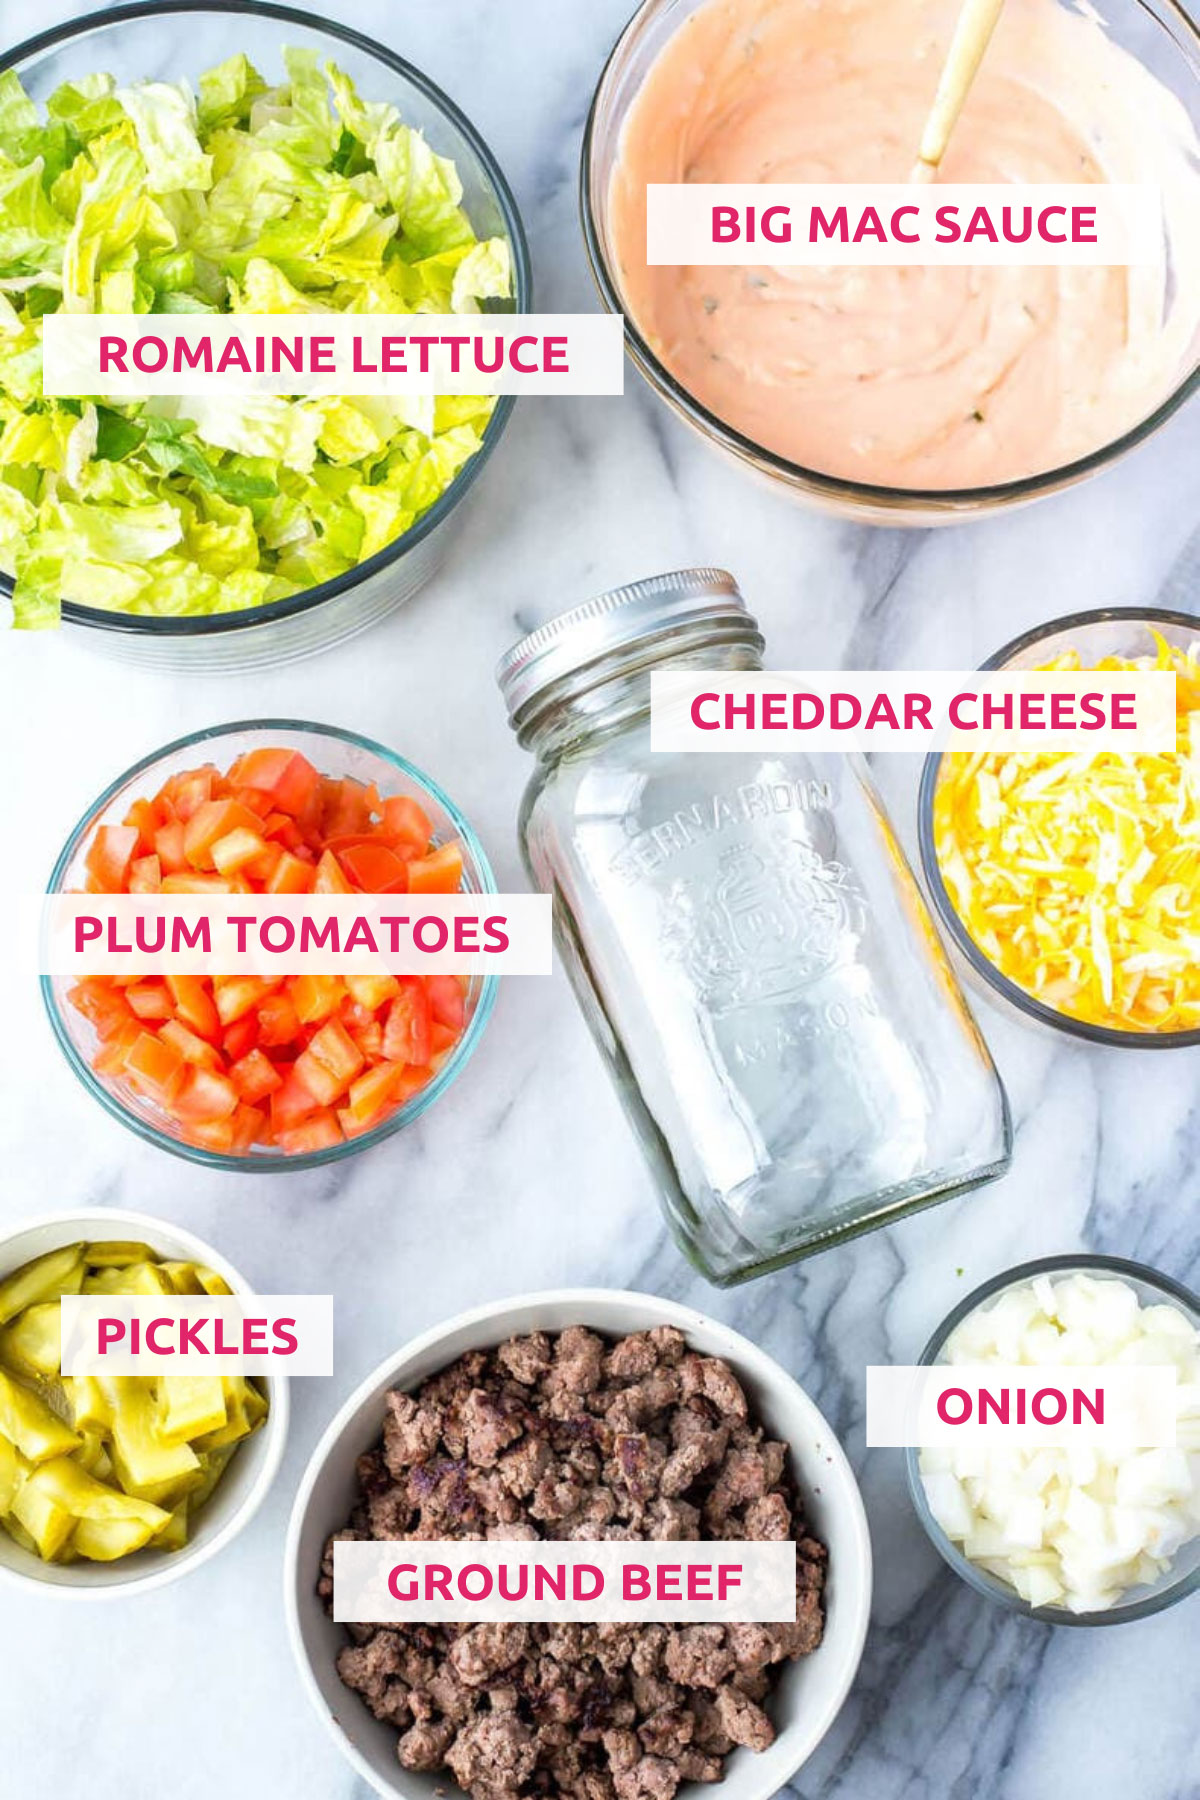 Ingredients for big mac salad jars: romaine lettuce, big mac sauce, tomatoes, cheddar cheese, pickles, ground beef and onion.